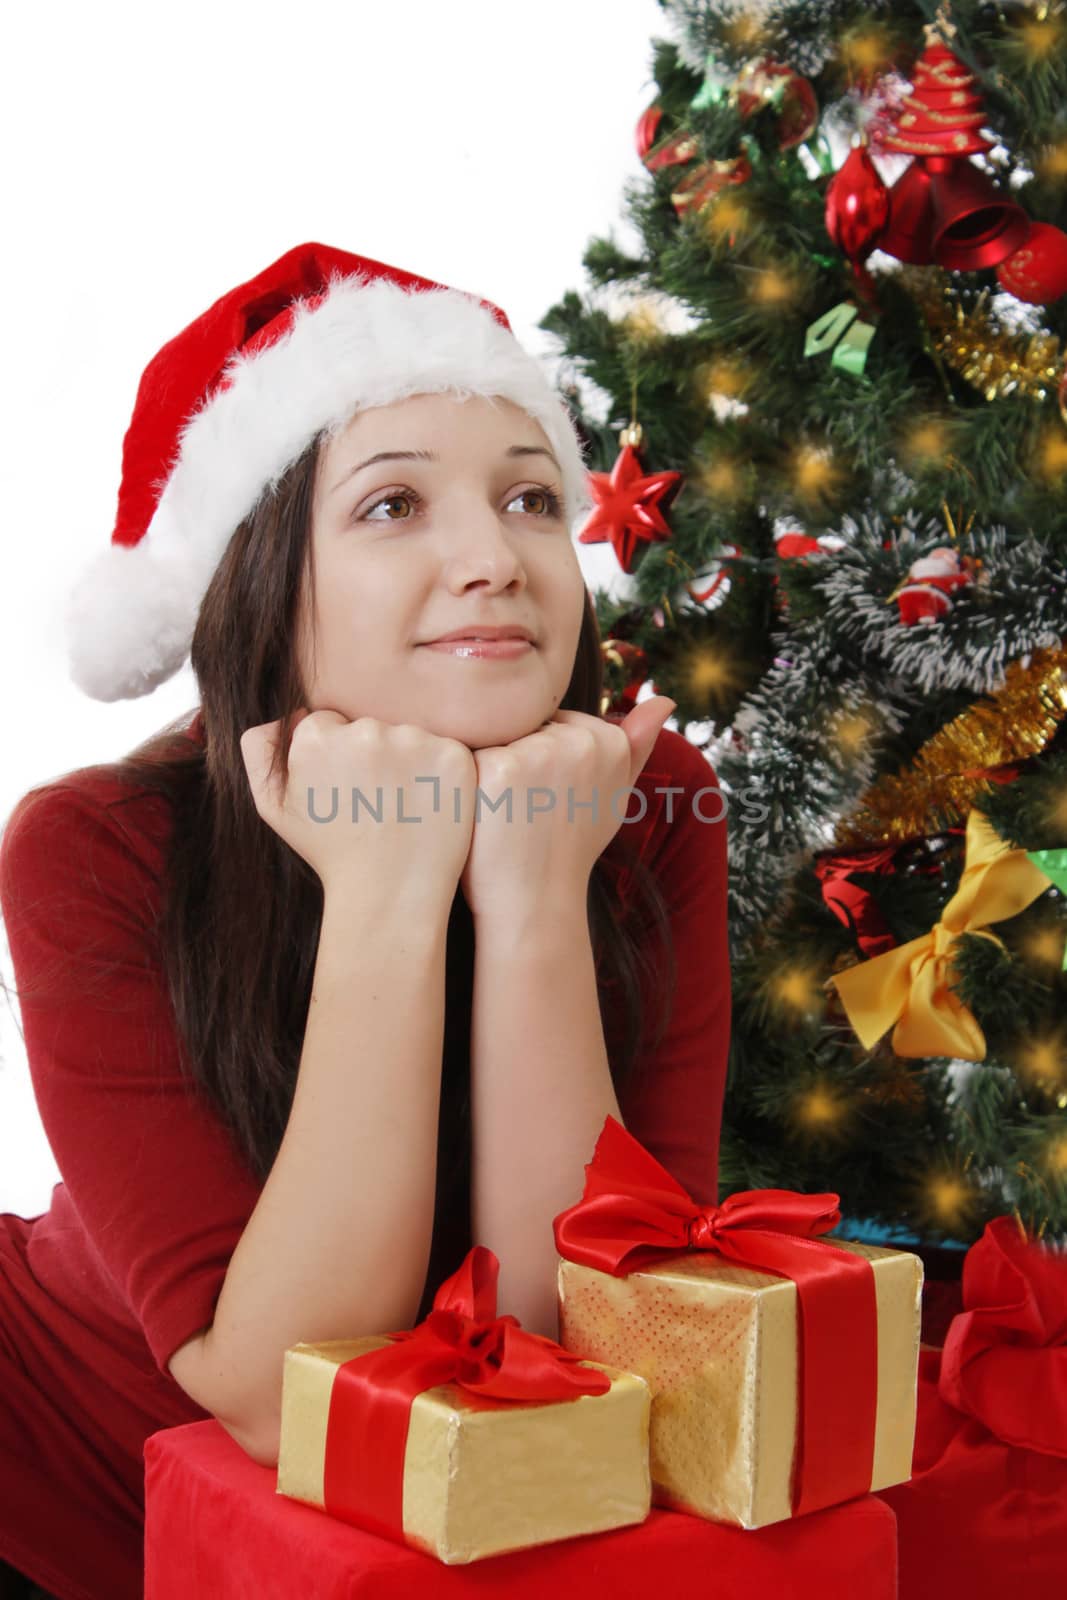 Dreaming girl with gifts sitting under Christmas tree by Angel_a